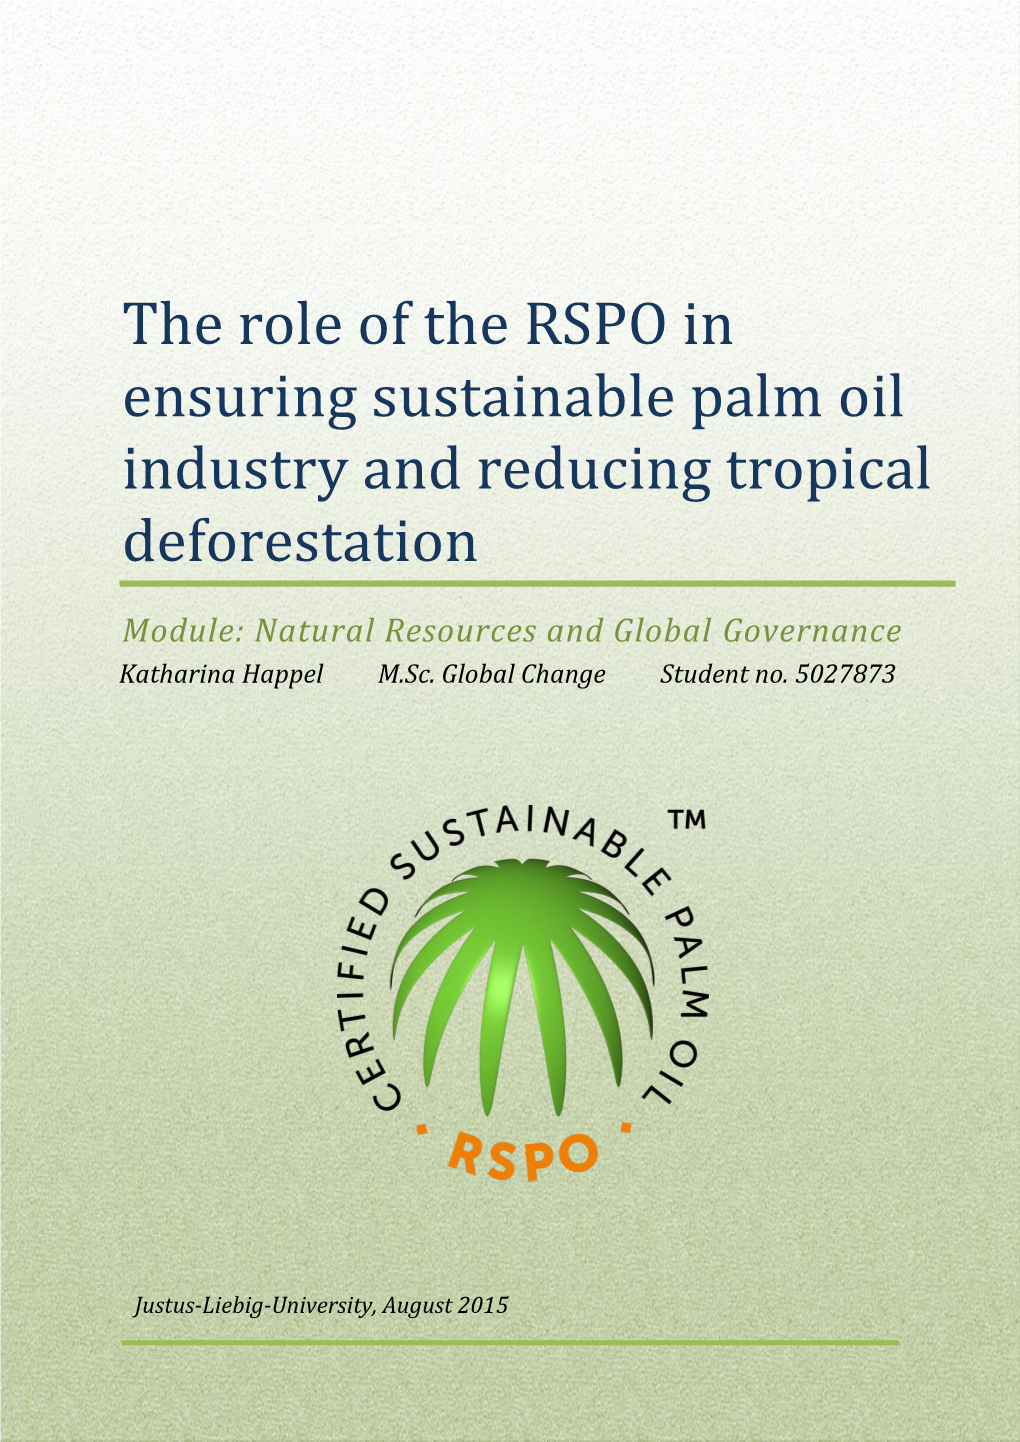 The Role of the RSPO in Ensuring Sustainable Palm Oil Industry and Reducing Tropical Deforestation